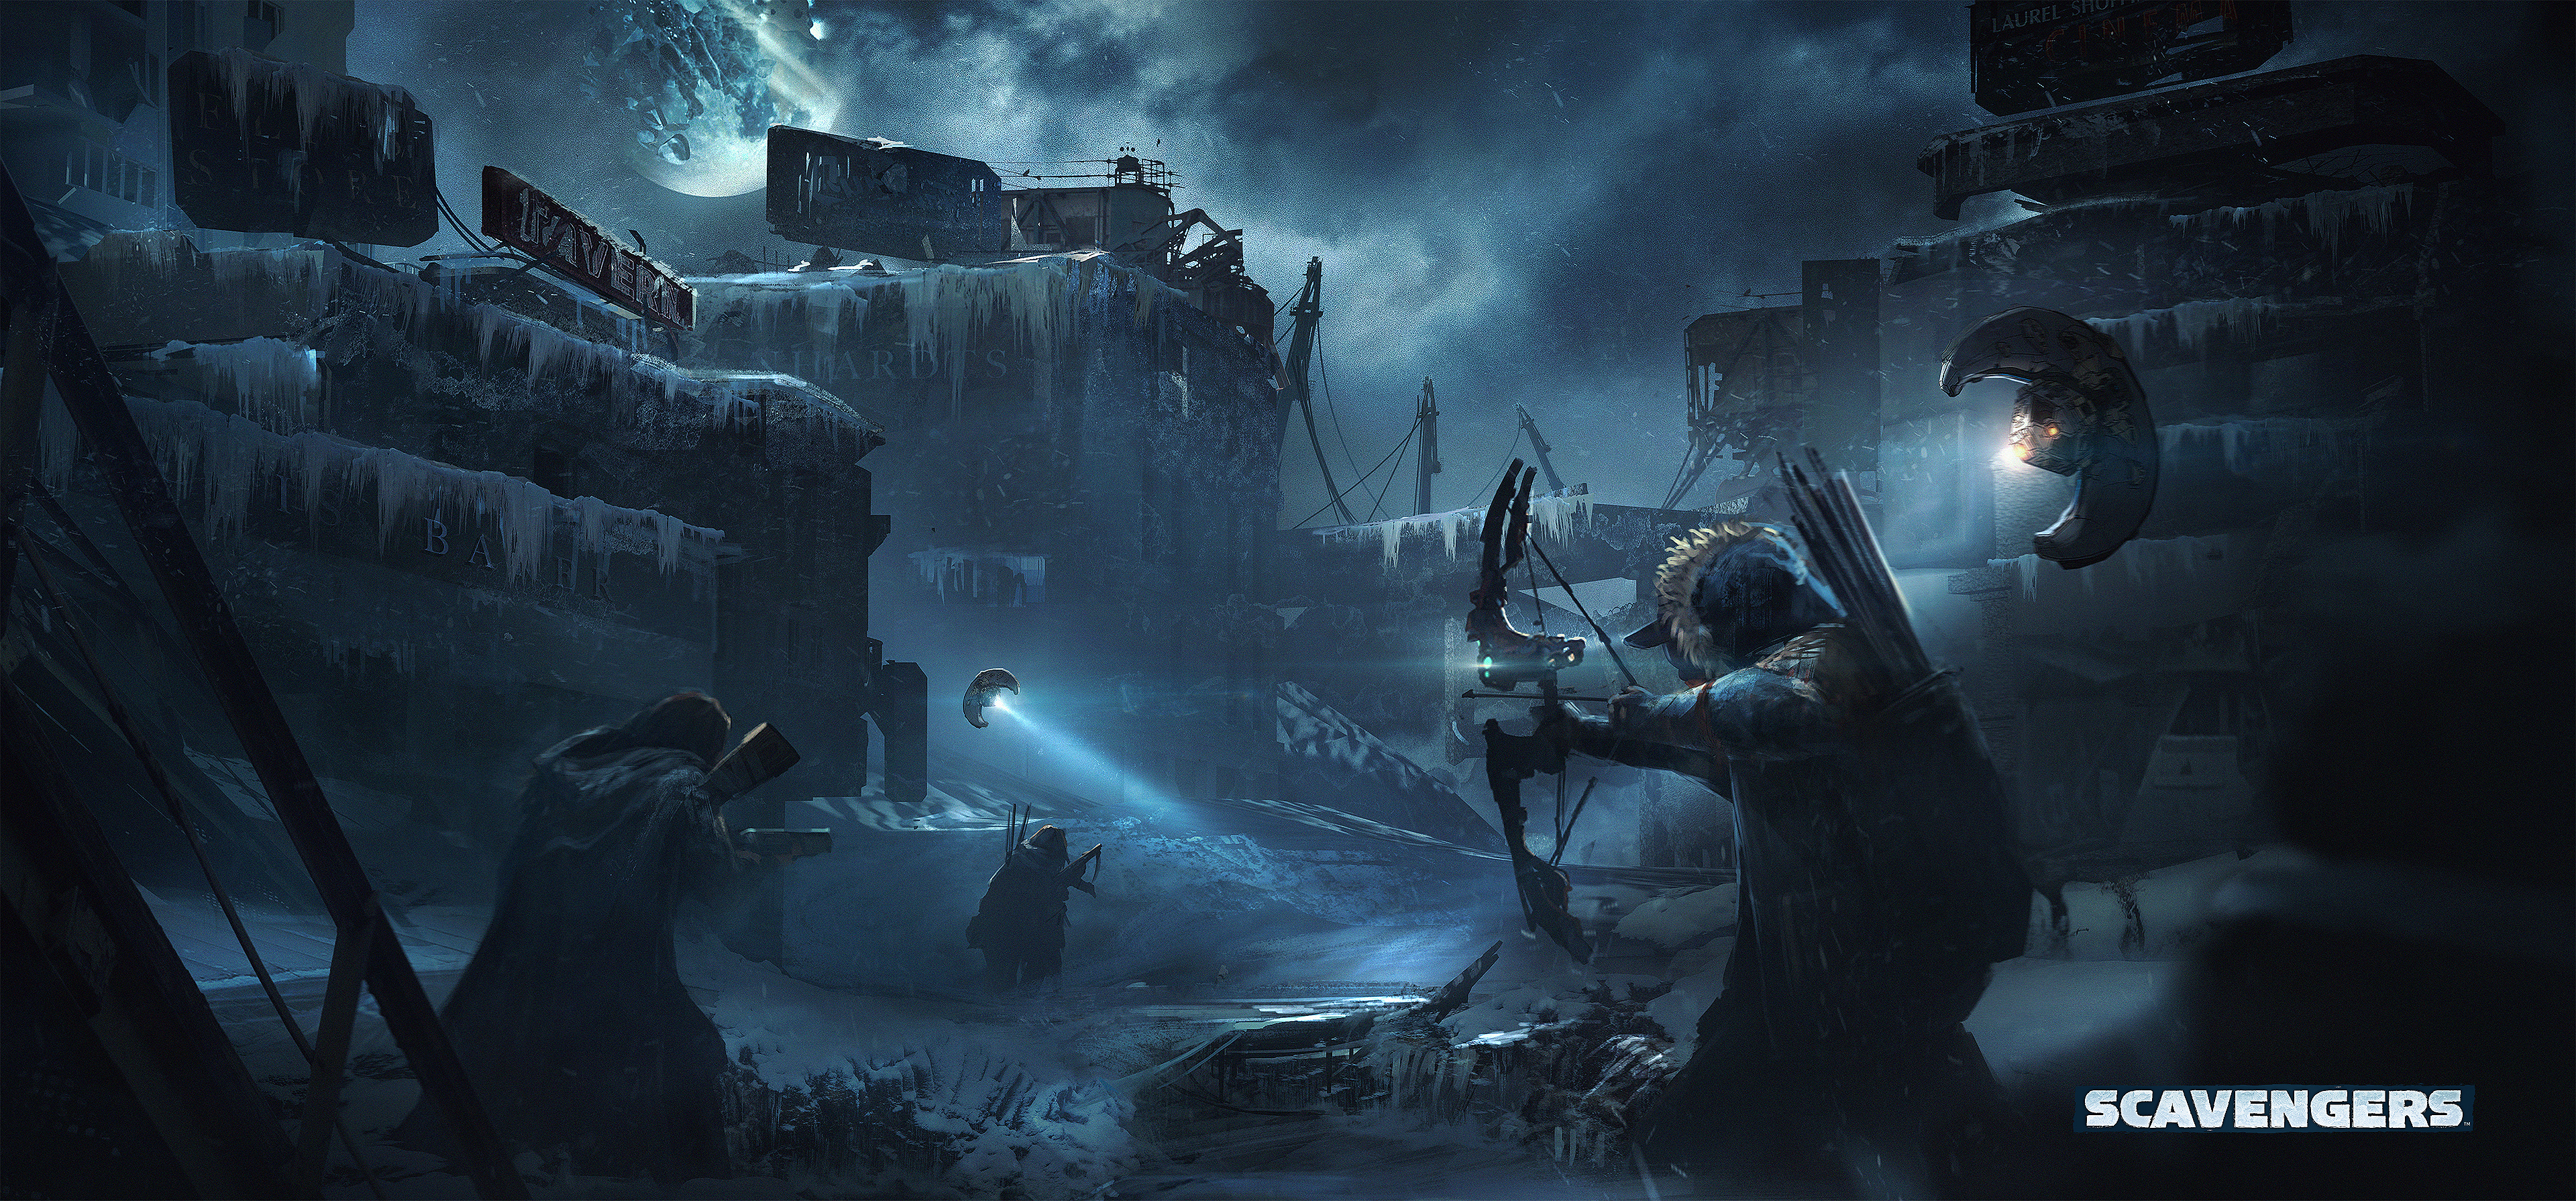 Video Game Scavengers 3840x1790